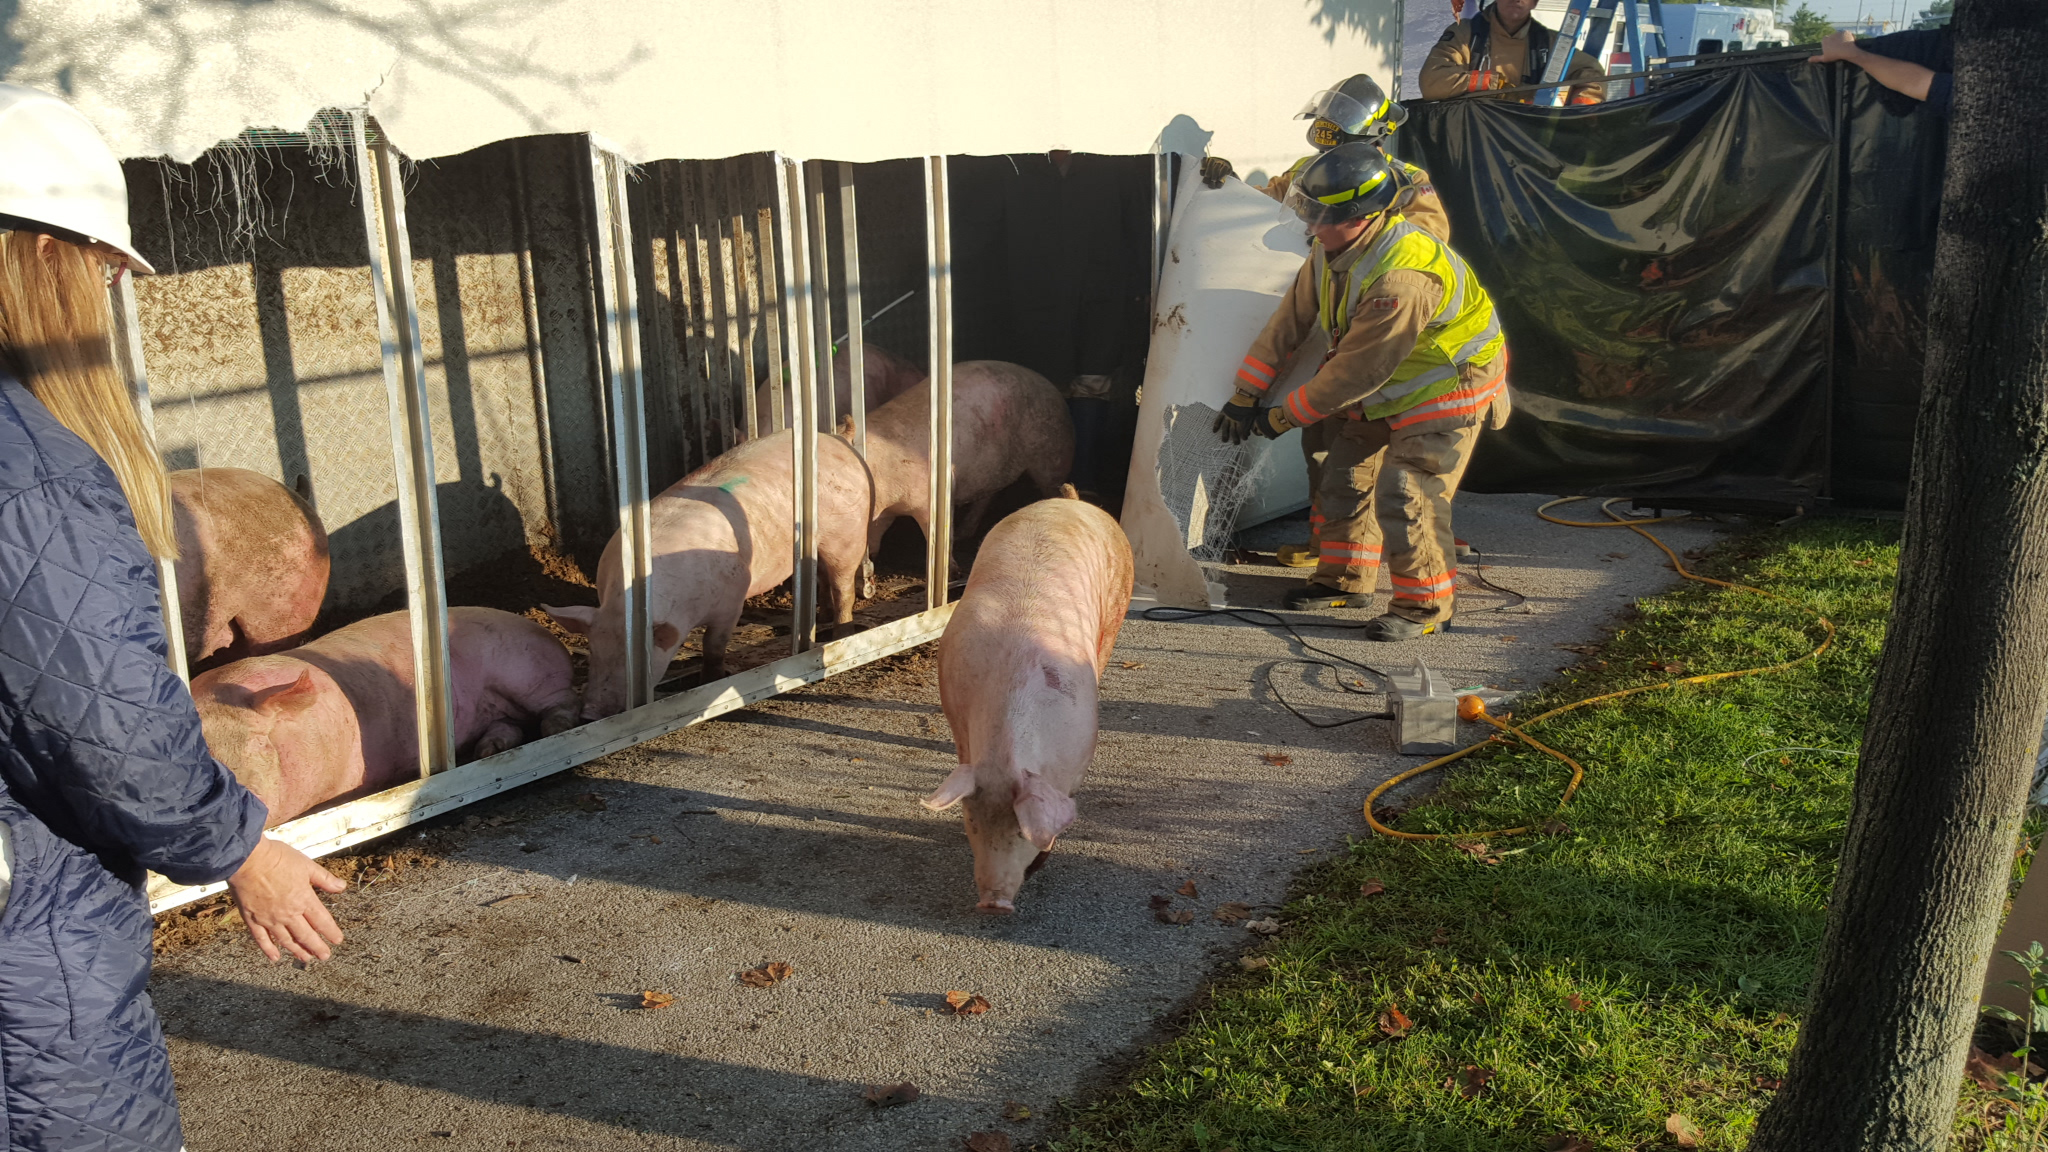 Pigs being corralled after a truck overturned at a slaughterhouse entrance on Oct. 5, 2016. Image credit: David Ritchie